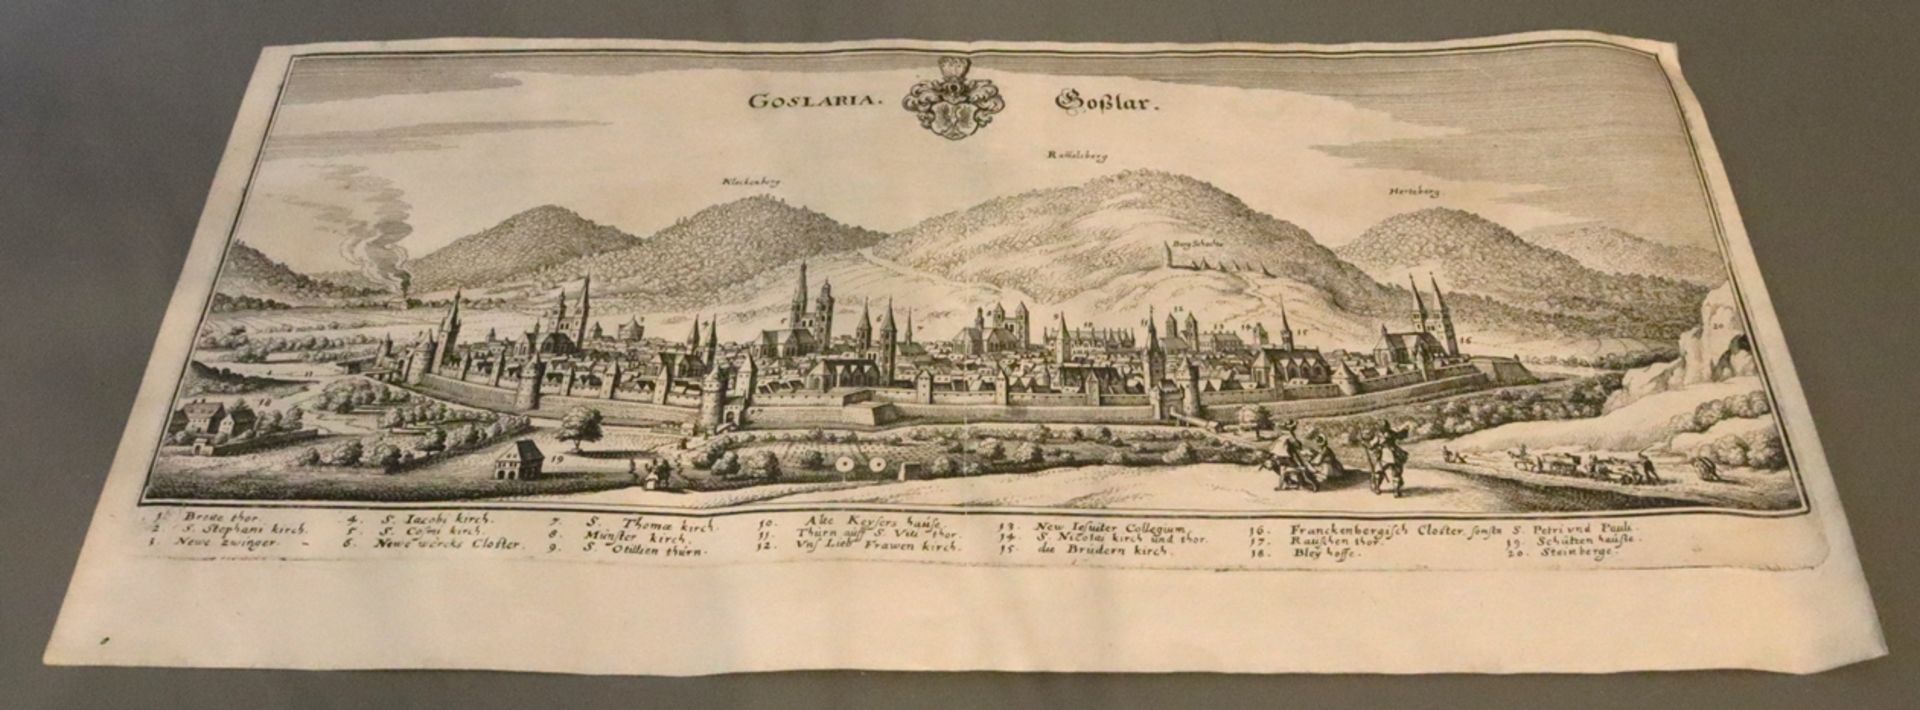 Copper engraving, city view of Goslar by Merian, 17th c., German